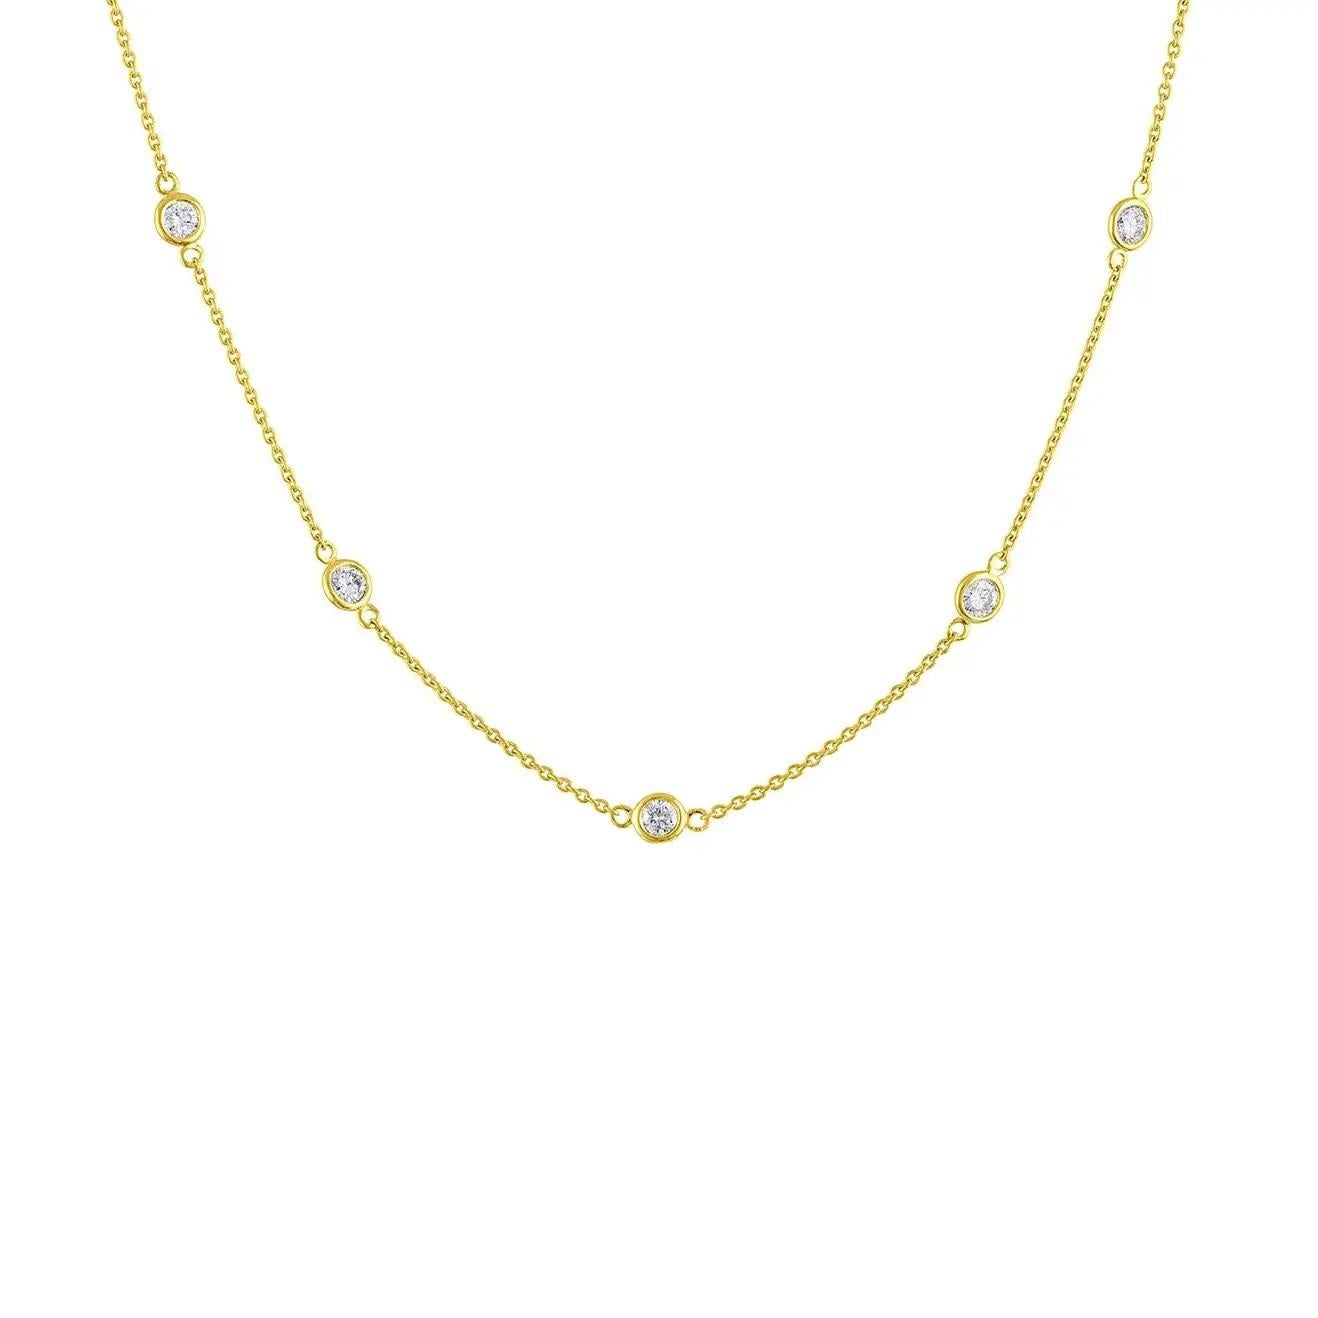 Fun & Chic this necklace is simple and sassy. It is great for daily stylish wear or an evening out. 

Diamonds Shape: Round 
Total Diamond Weight: 1.30 ct 
No. of Diamonds: 14
Diamond Color: I - J 
Diamond Clarity: I (Included) 

Metal: 14K Yellow